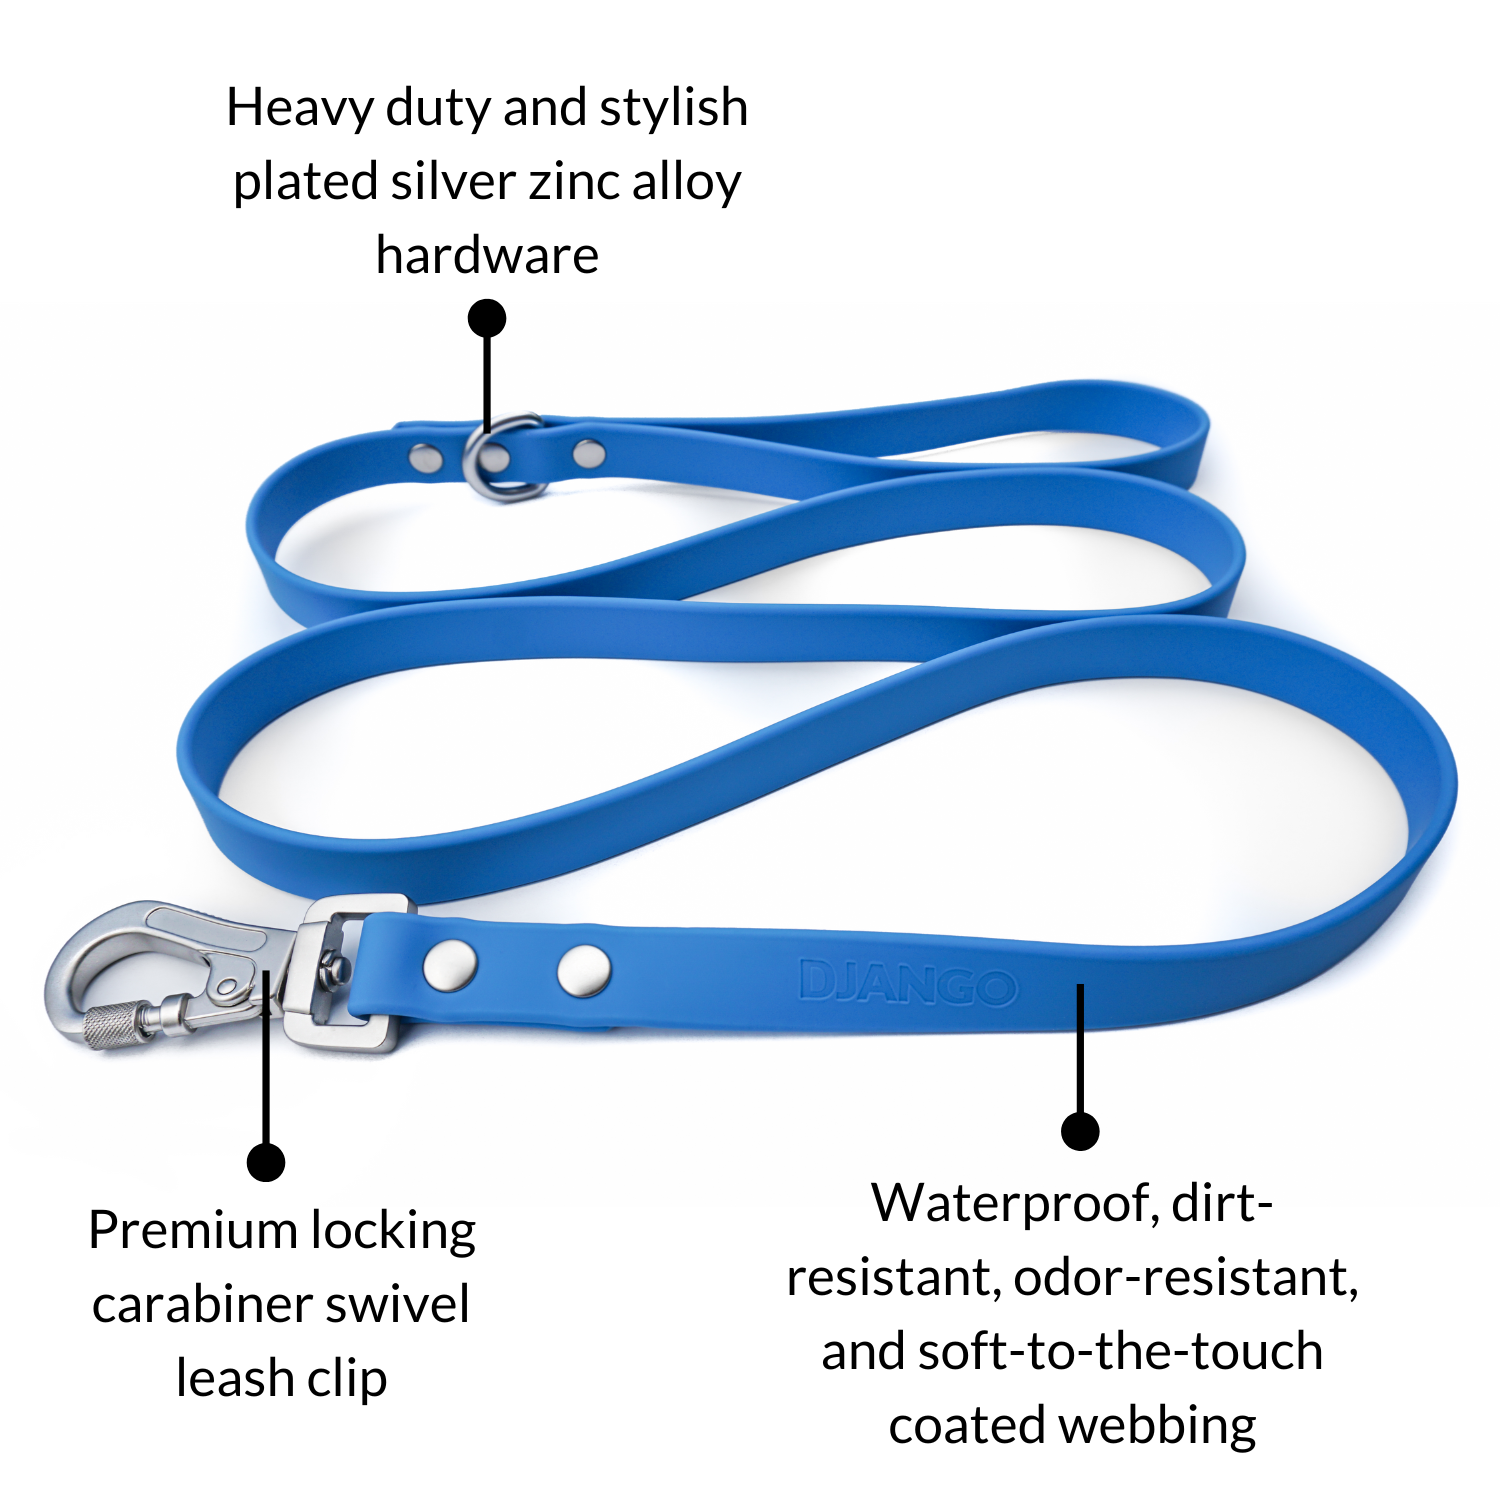 DJANGO Tahoe Dog Leash in Alpine Blue - The waterproof dog leash features heavy duty and stylish plated silver hardware and a premium locking carabiner leash clip for extra security - djangobrand.com